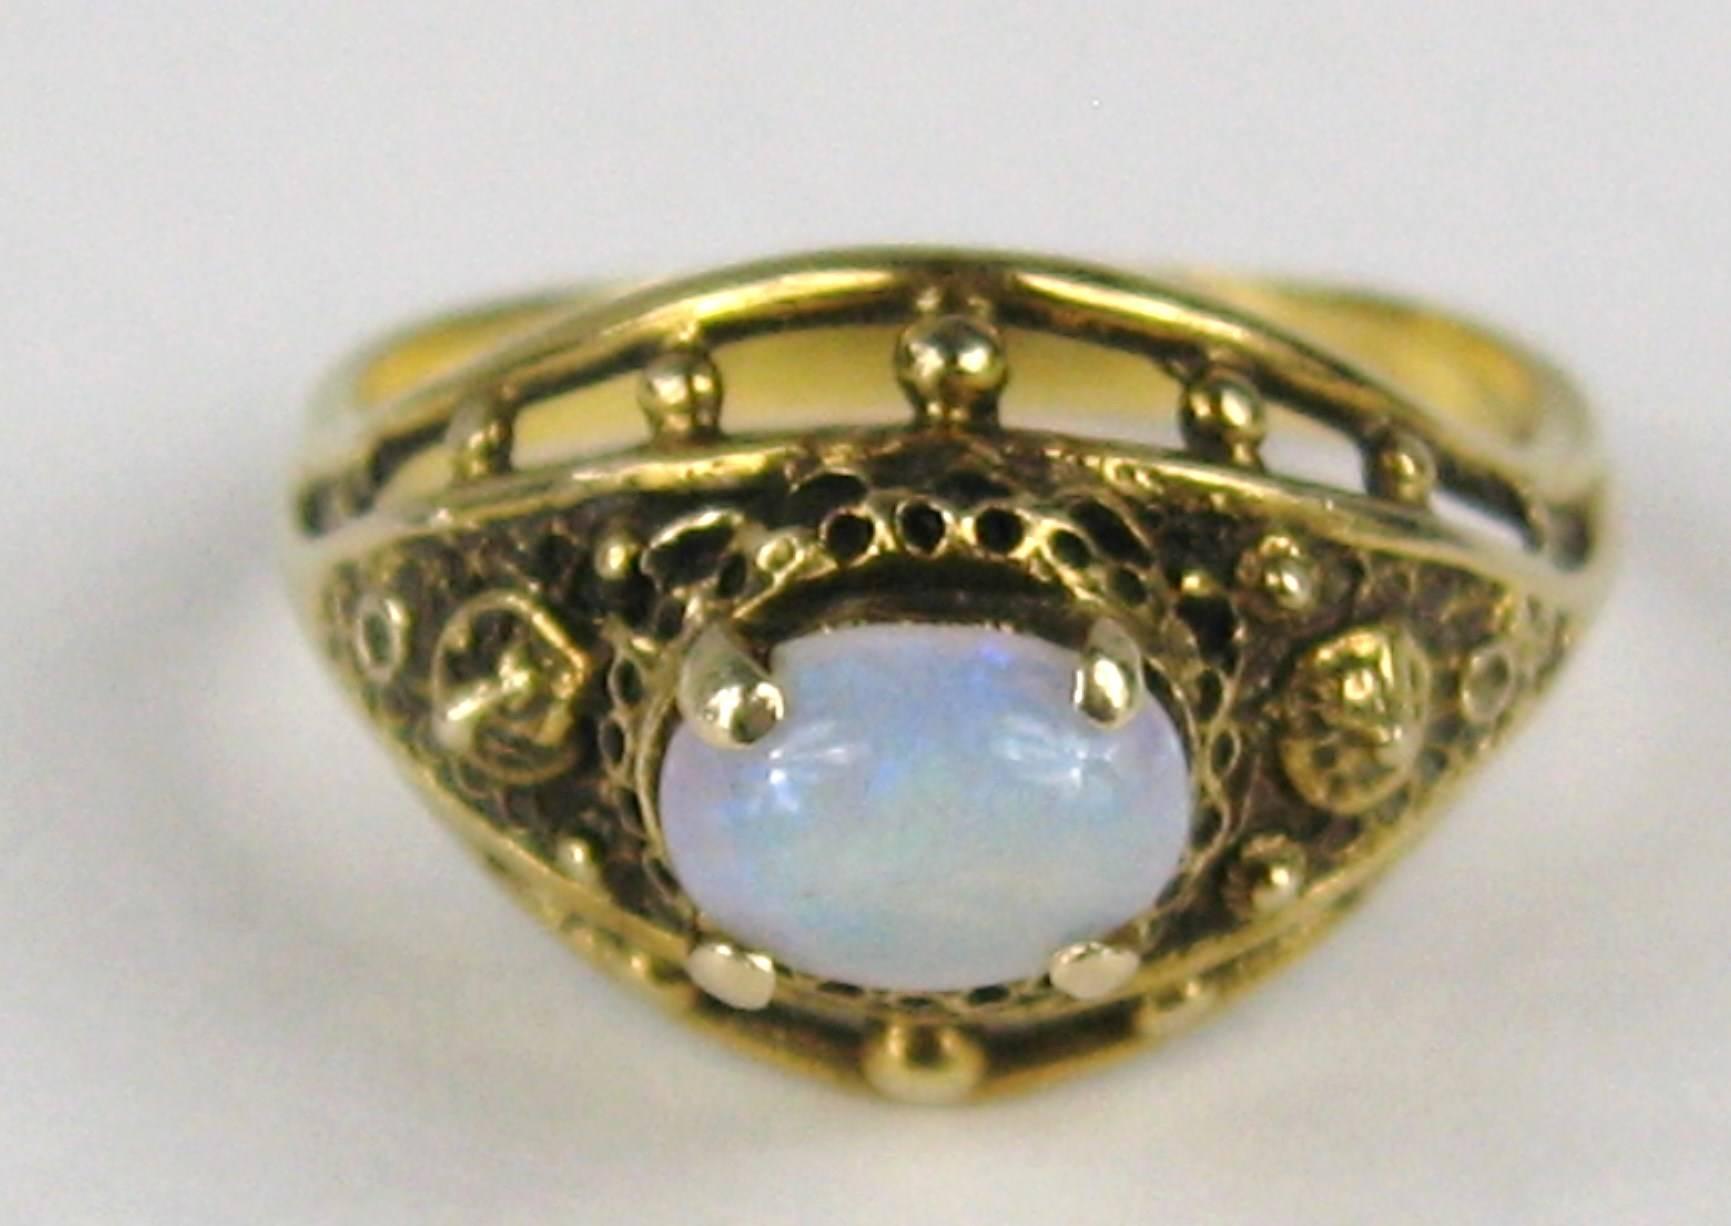 Stunning High Prong Set Opal Ring. Set in 14K Gold.  Prong set oval opal. The ring is a size 6.5 and can be sized by us or your jeweler. Please be sure to check our storefront for more jewelry as well as our huge collection of costume jewelry. We